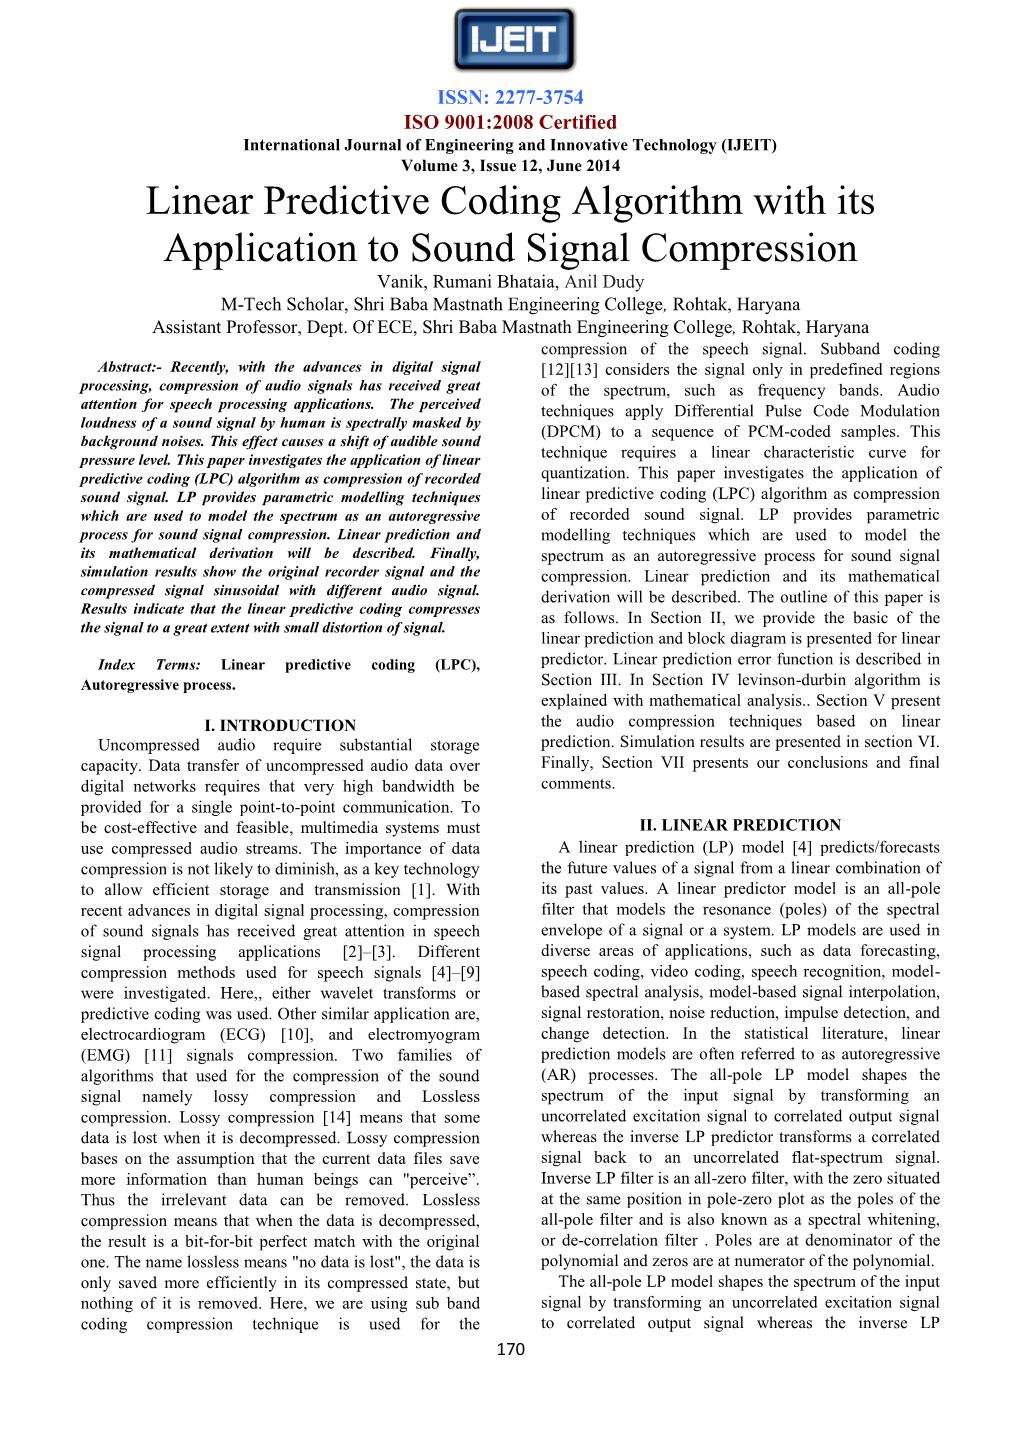 Linear Predictive Coding Algorithm with Its Application to Sound Signal